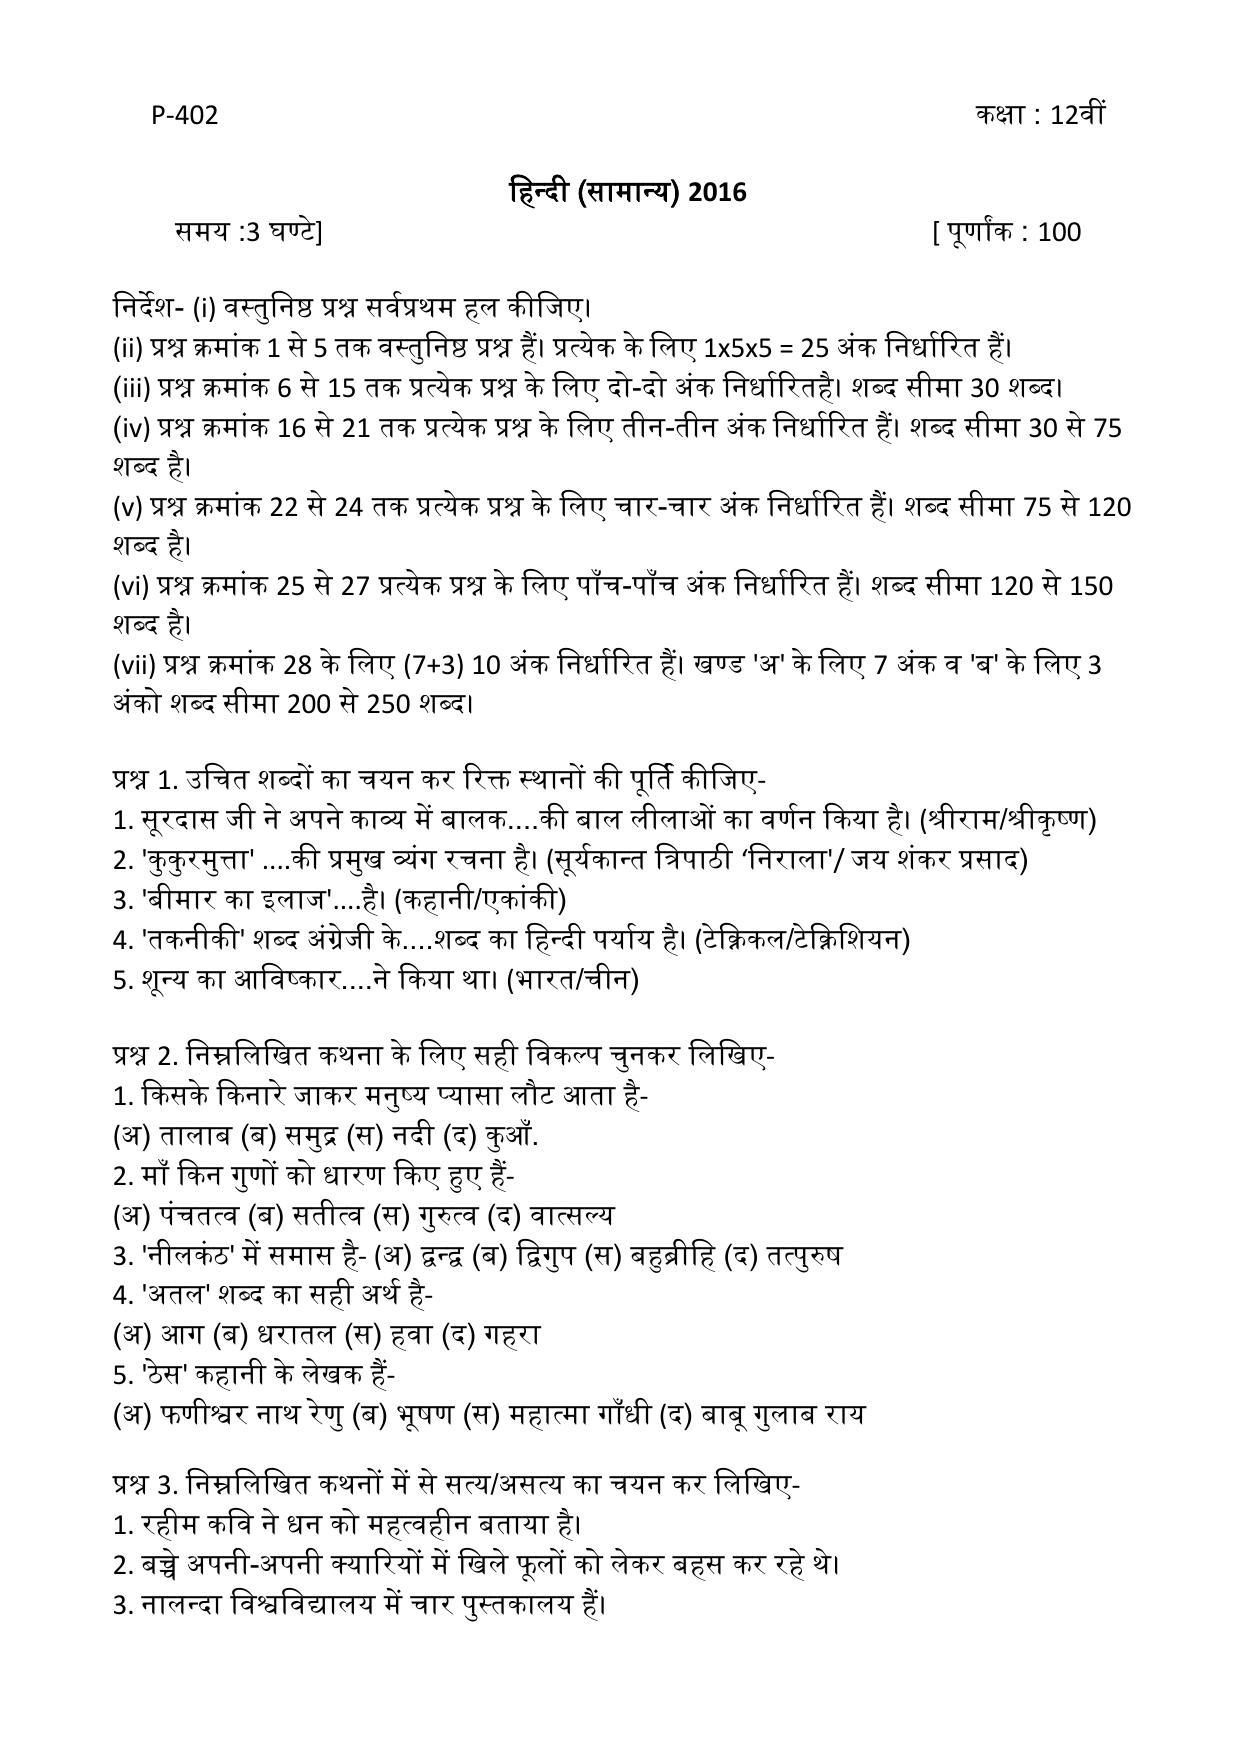 MP Board Class 12 Hindi General 2016 Question Paper - Page 1